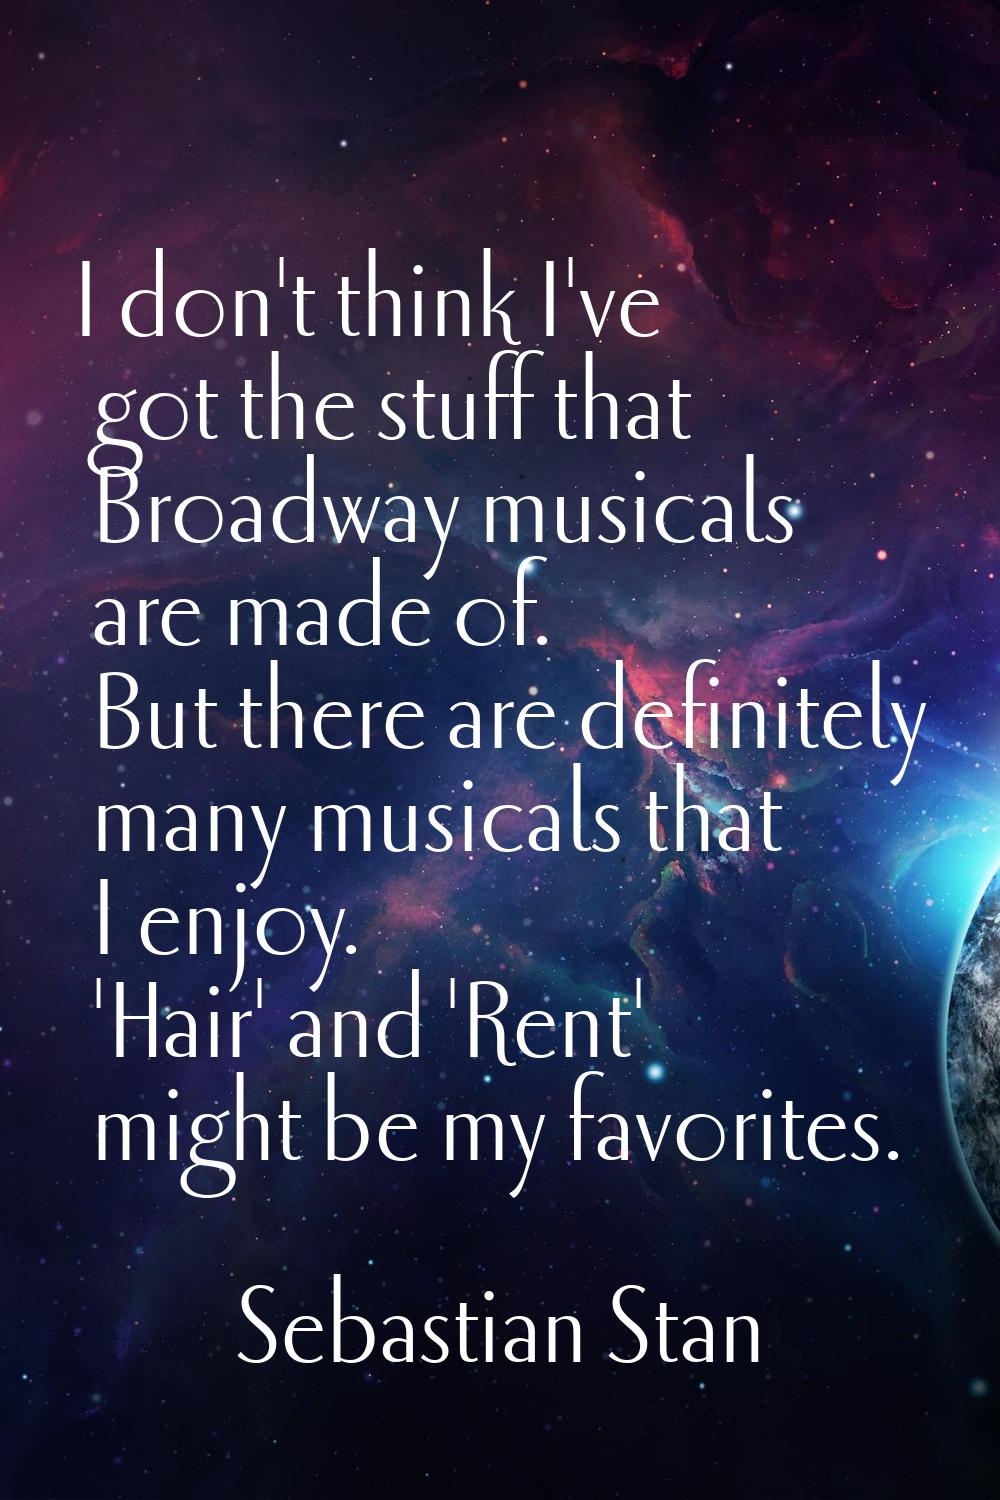 I don't think I've got the stuff that Broadway musicals are made of. But there are definitely many 